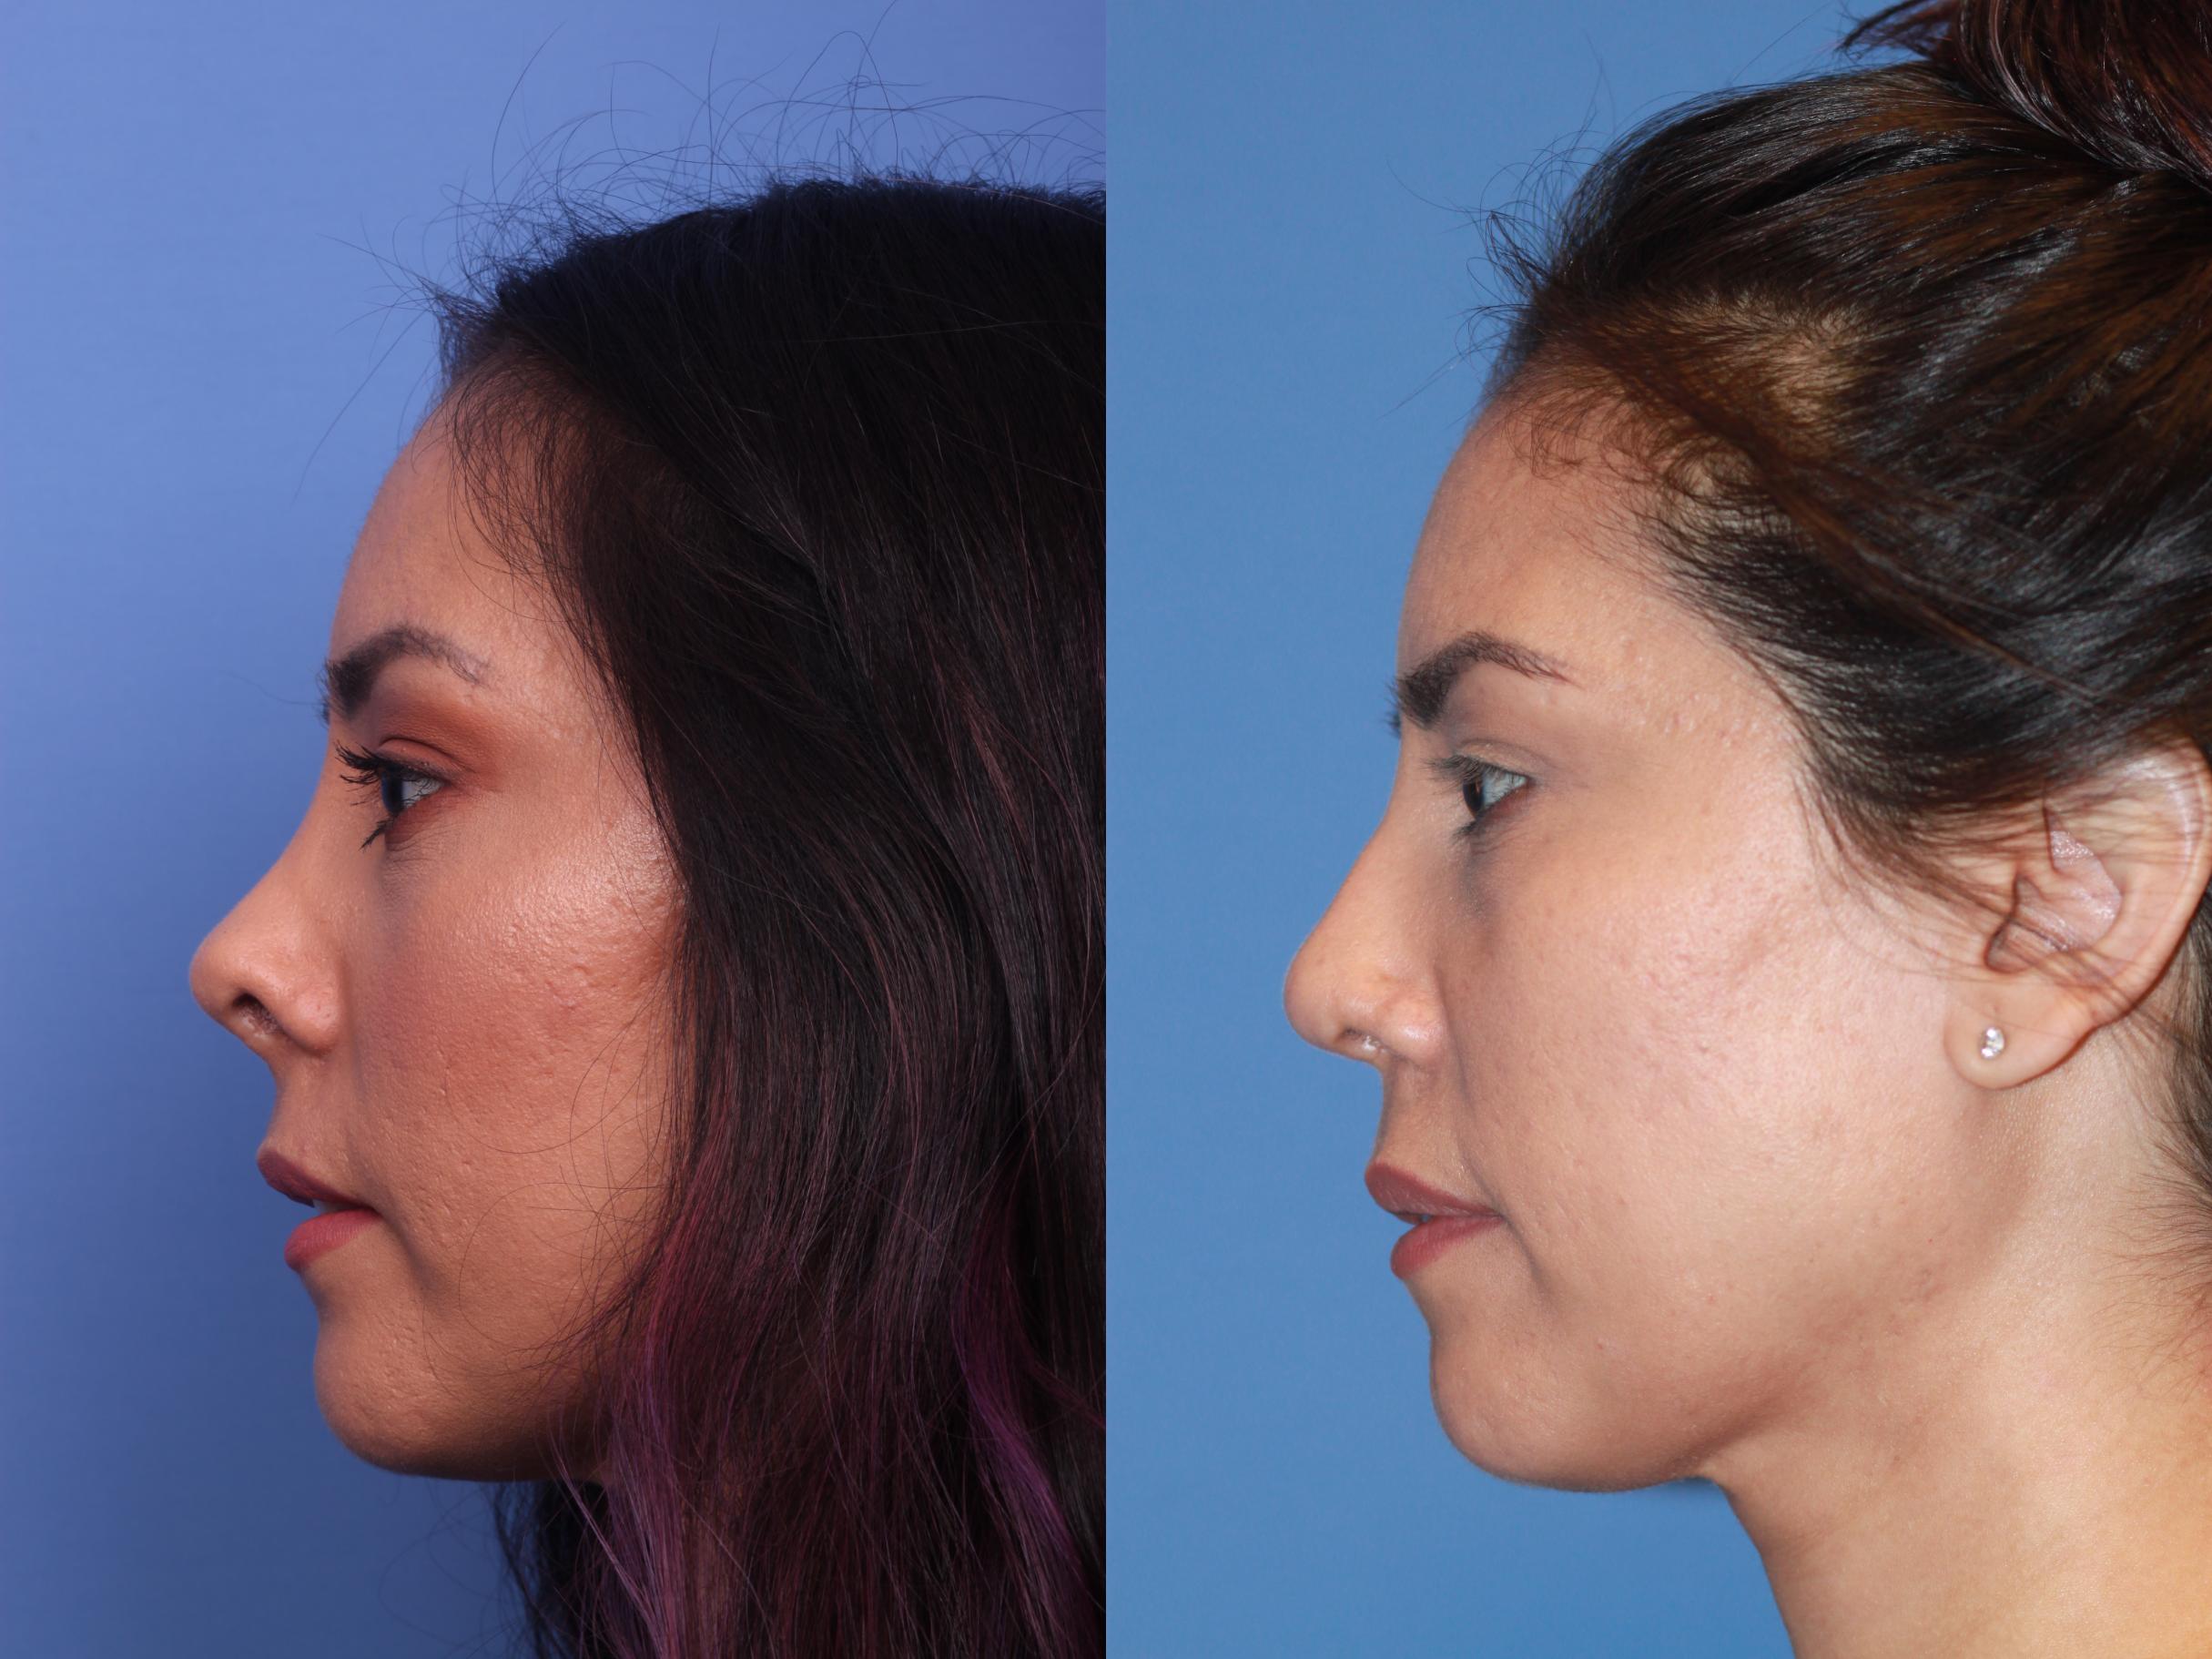 Does Insurance Cover Functional Rhinoplasty All